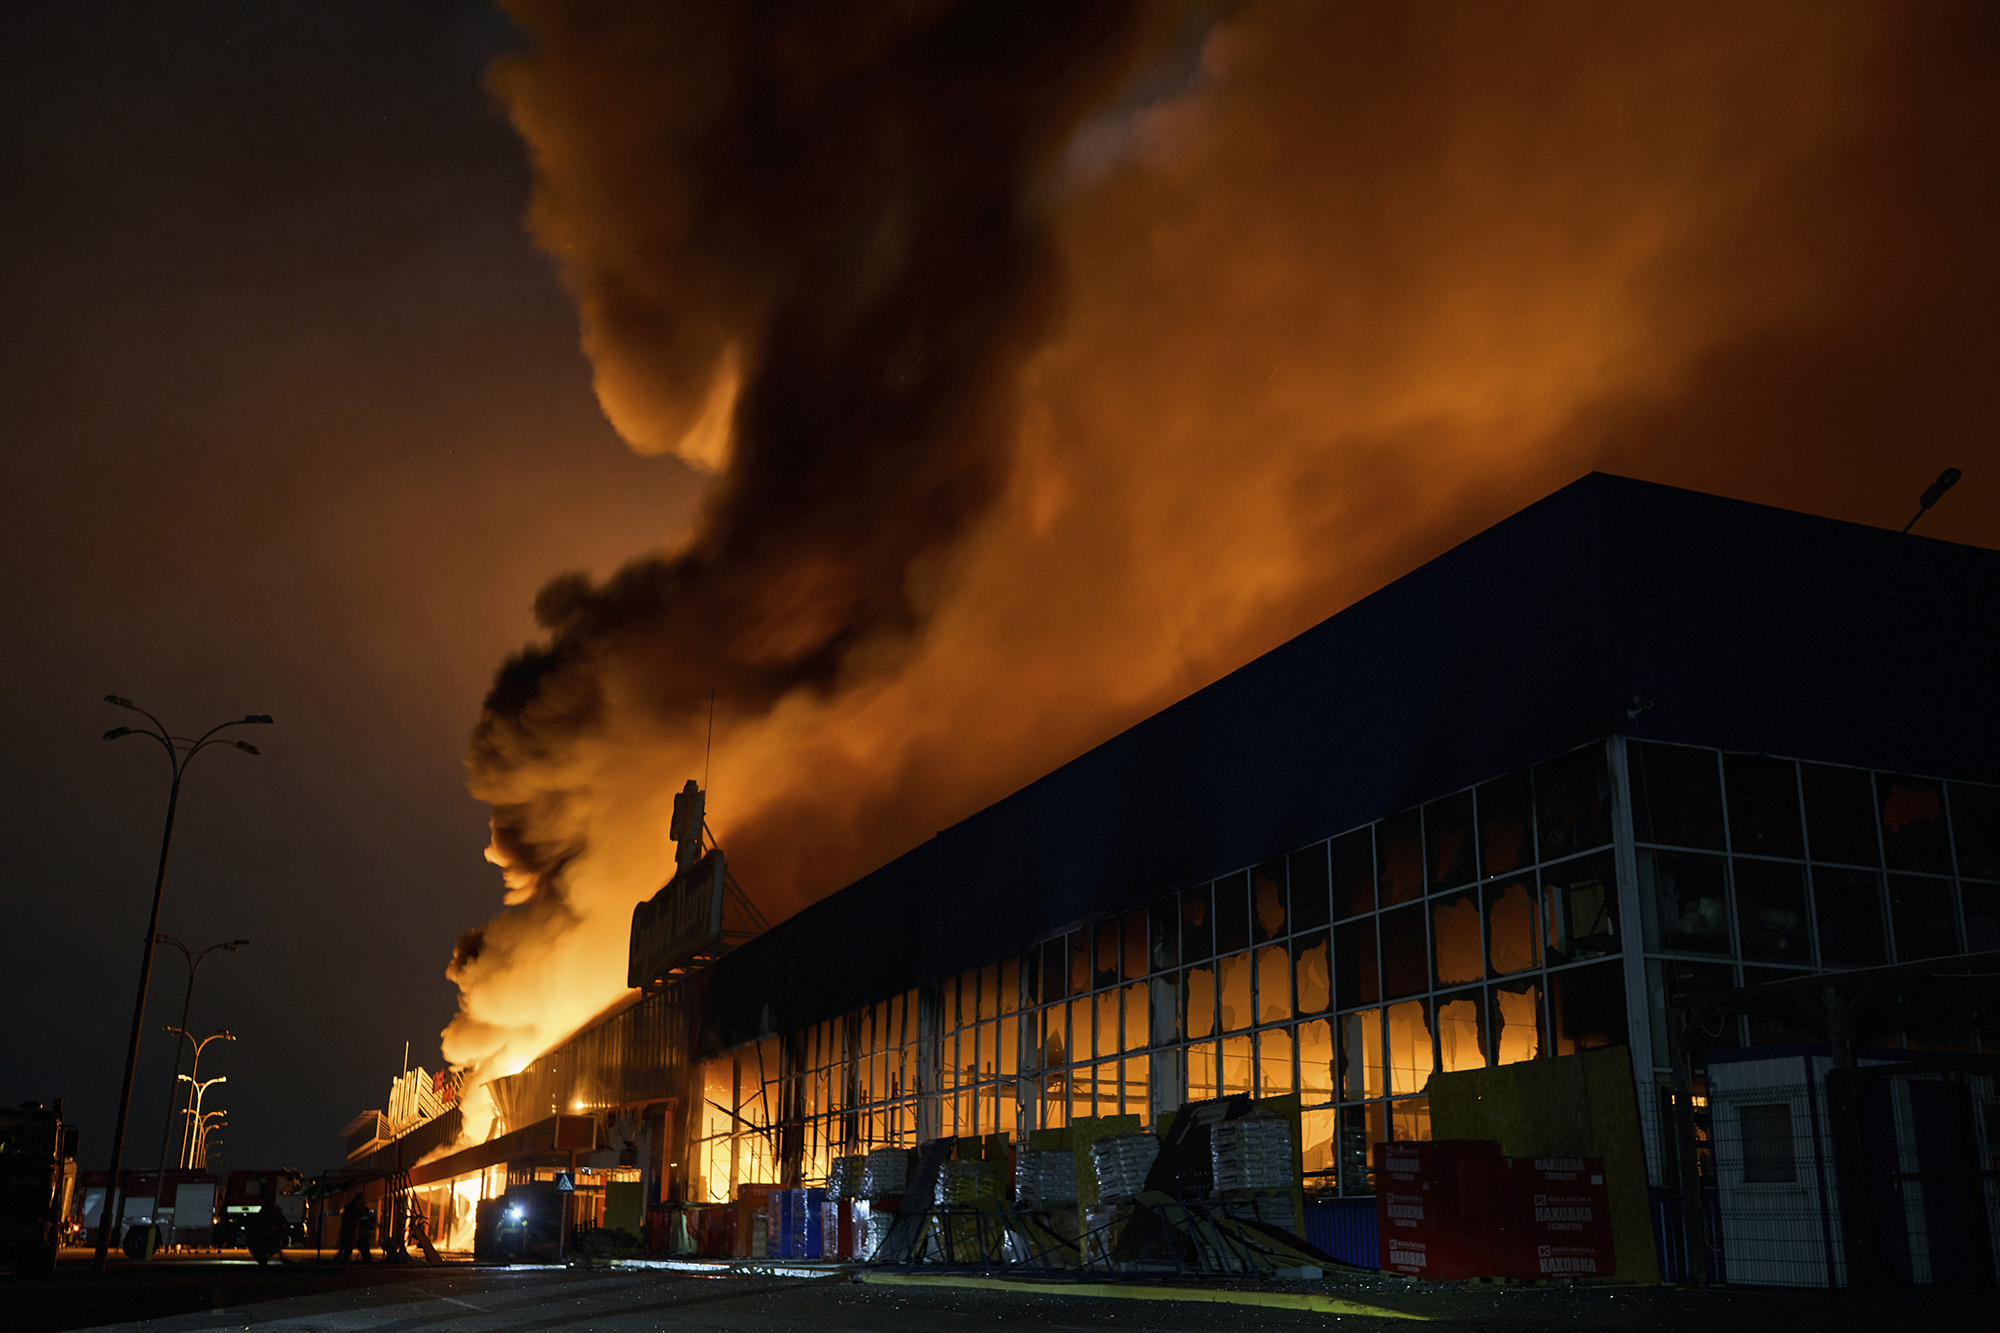 Ukrainian State Emergency Service firefighters attend to a fire at a shopping center in Kherson, Ukraine, on February 3.